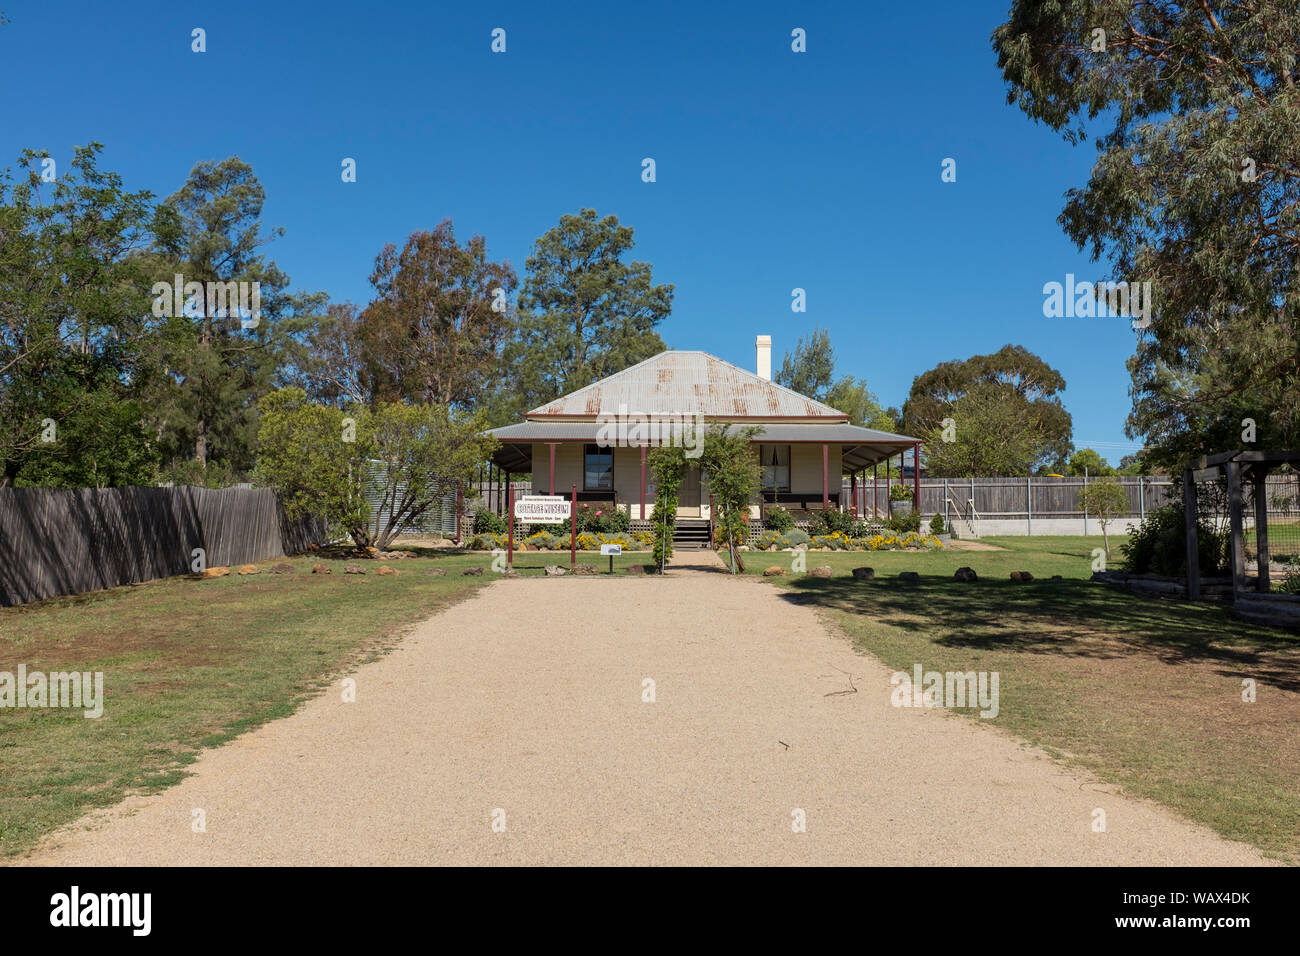 Cottage Museum, Rylstone, NSW, Australia. The museum showcases rural life in this country town. Stock Photo